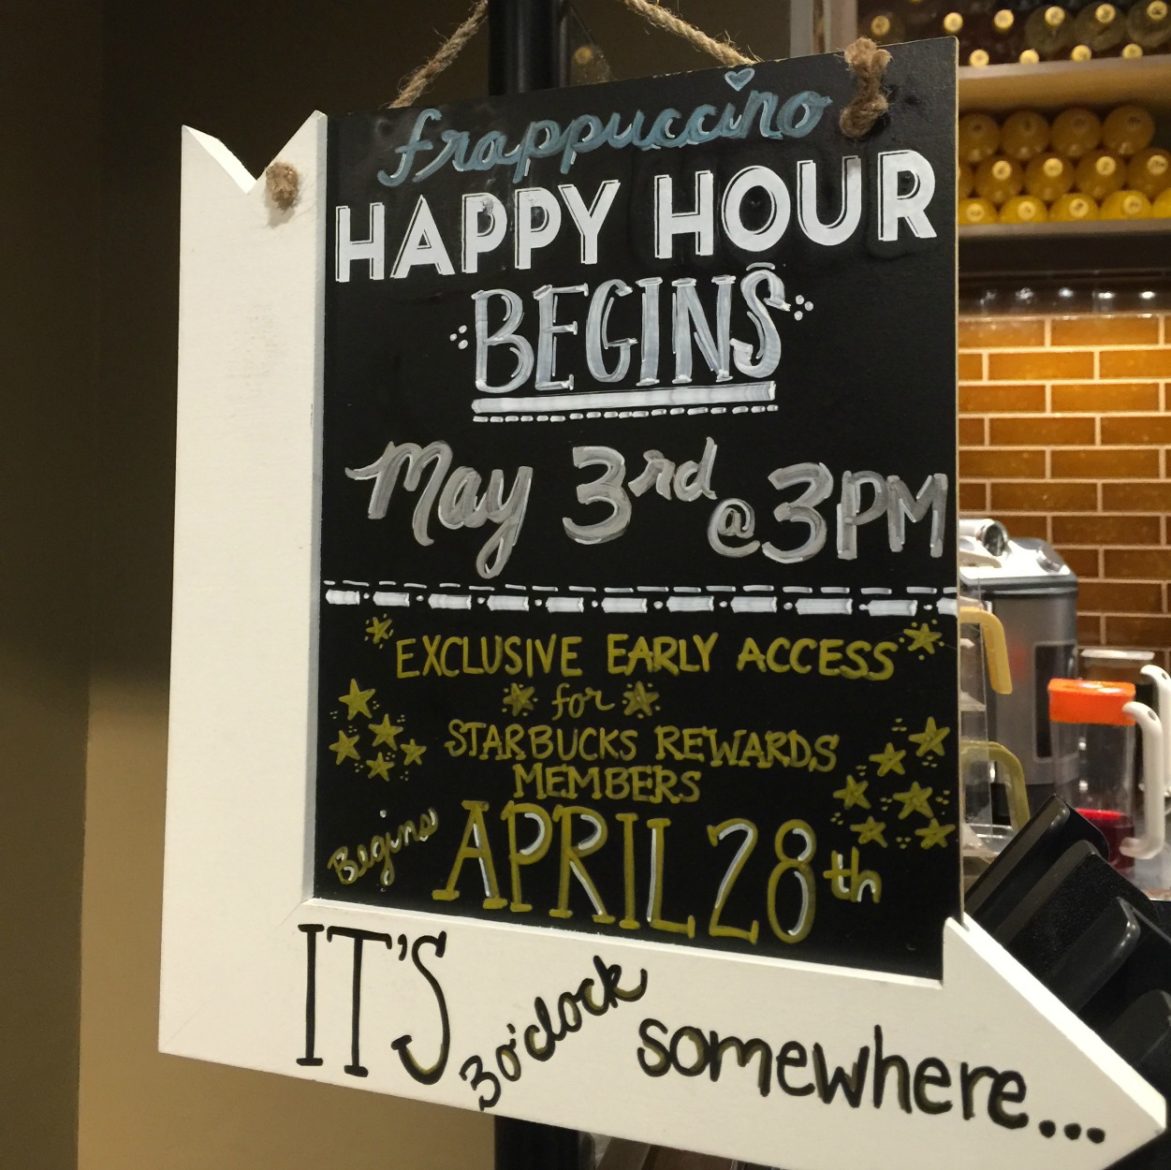 Star treatment: Frappuccino Happy Hour beginning April 28th.